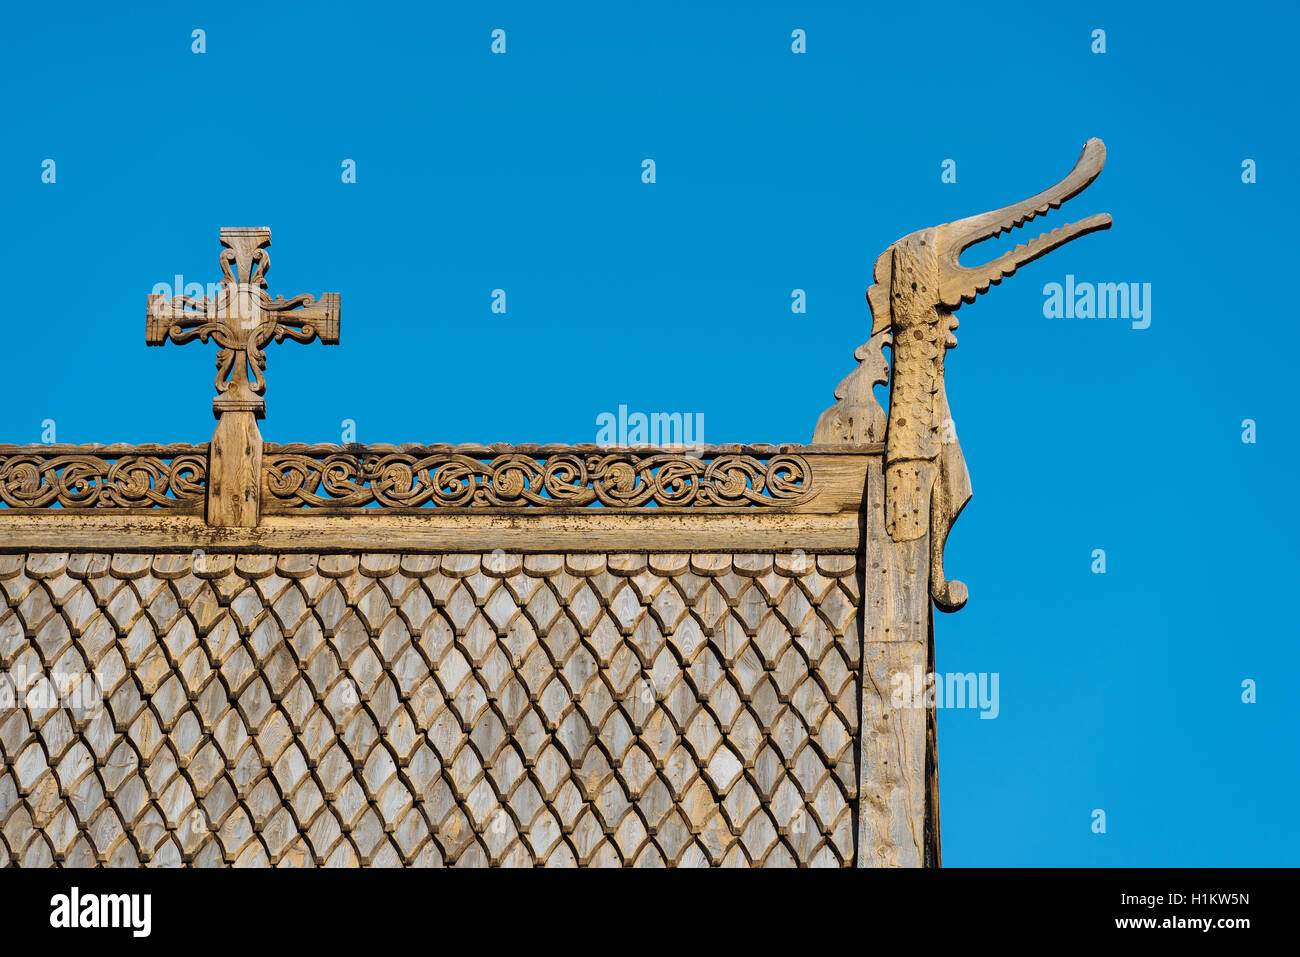 Roof detail with wood shingles, wooden cross and dragon head, Stave Church Lom, Lom, Oppland, Norway Stock Photo